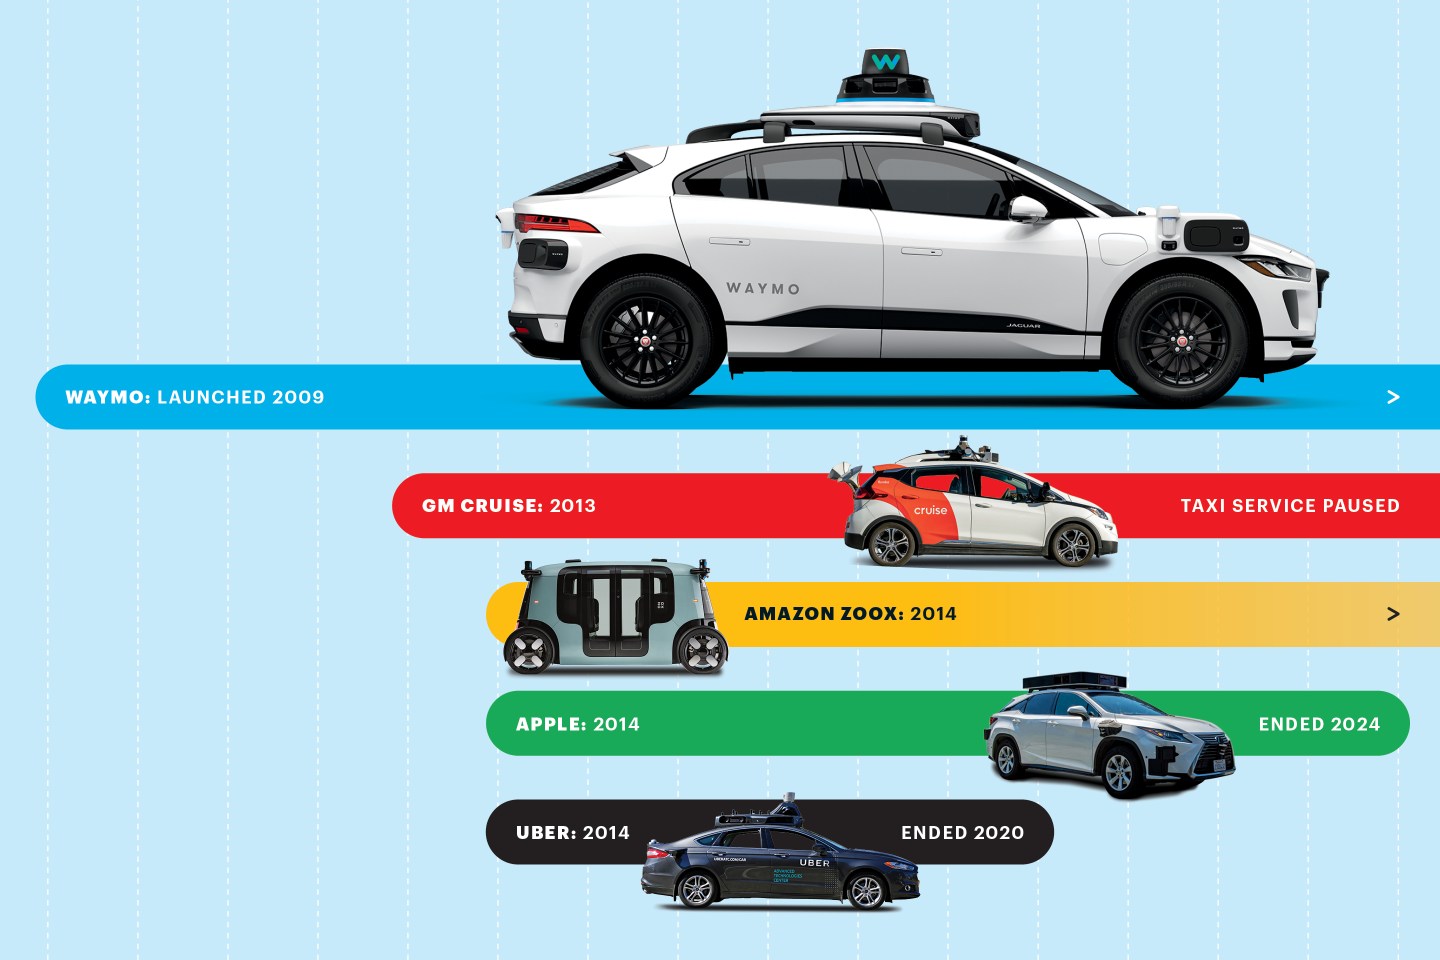 Timeline graphic of self-driving cars Waymo, GM Cruise, Amazon Zoox, Apple, and Uber showing when the companies have entered and quit their testing.